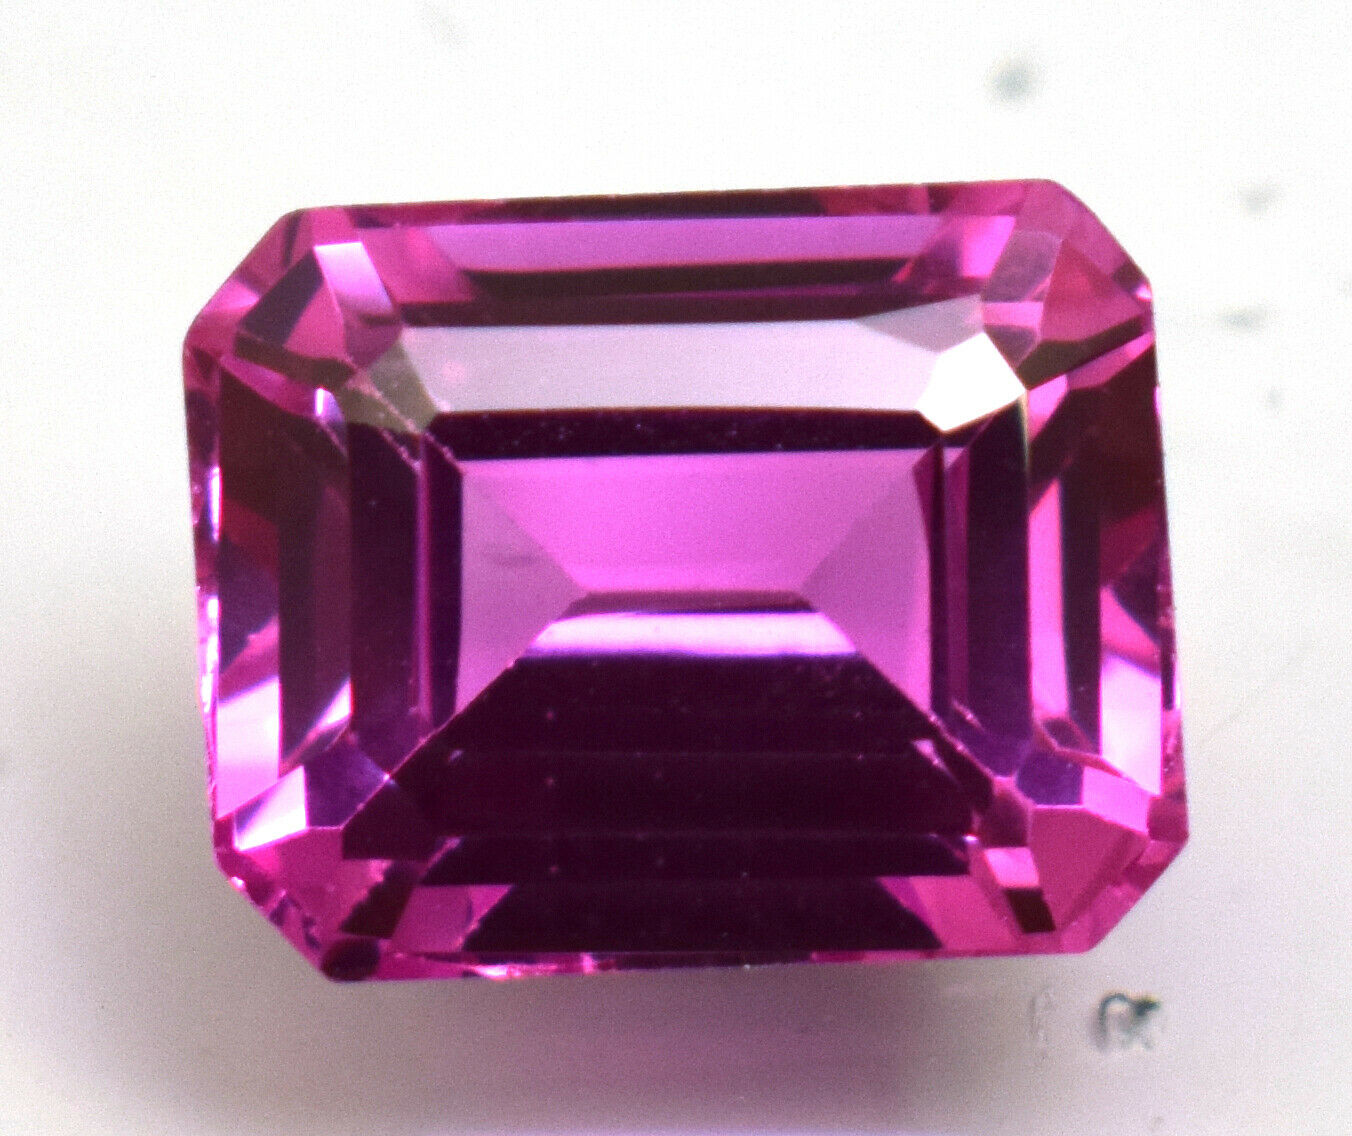 Natural Pink Sapphire Faceted Emerald Shape 5.00 Ct Loose Gemstone For Ring Use